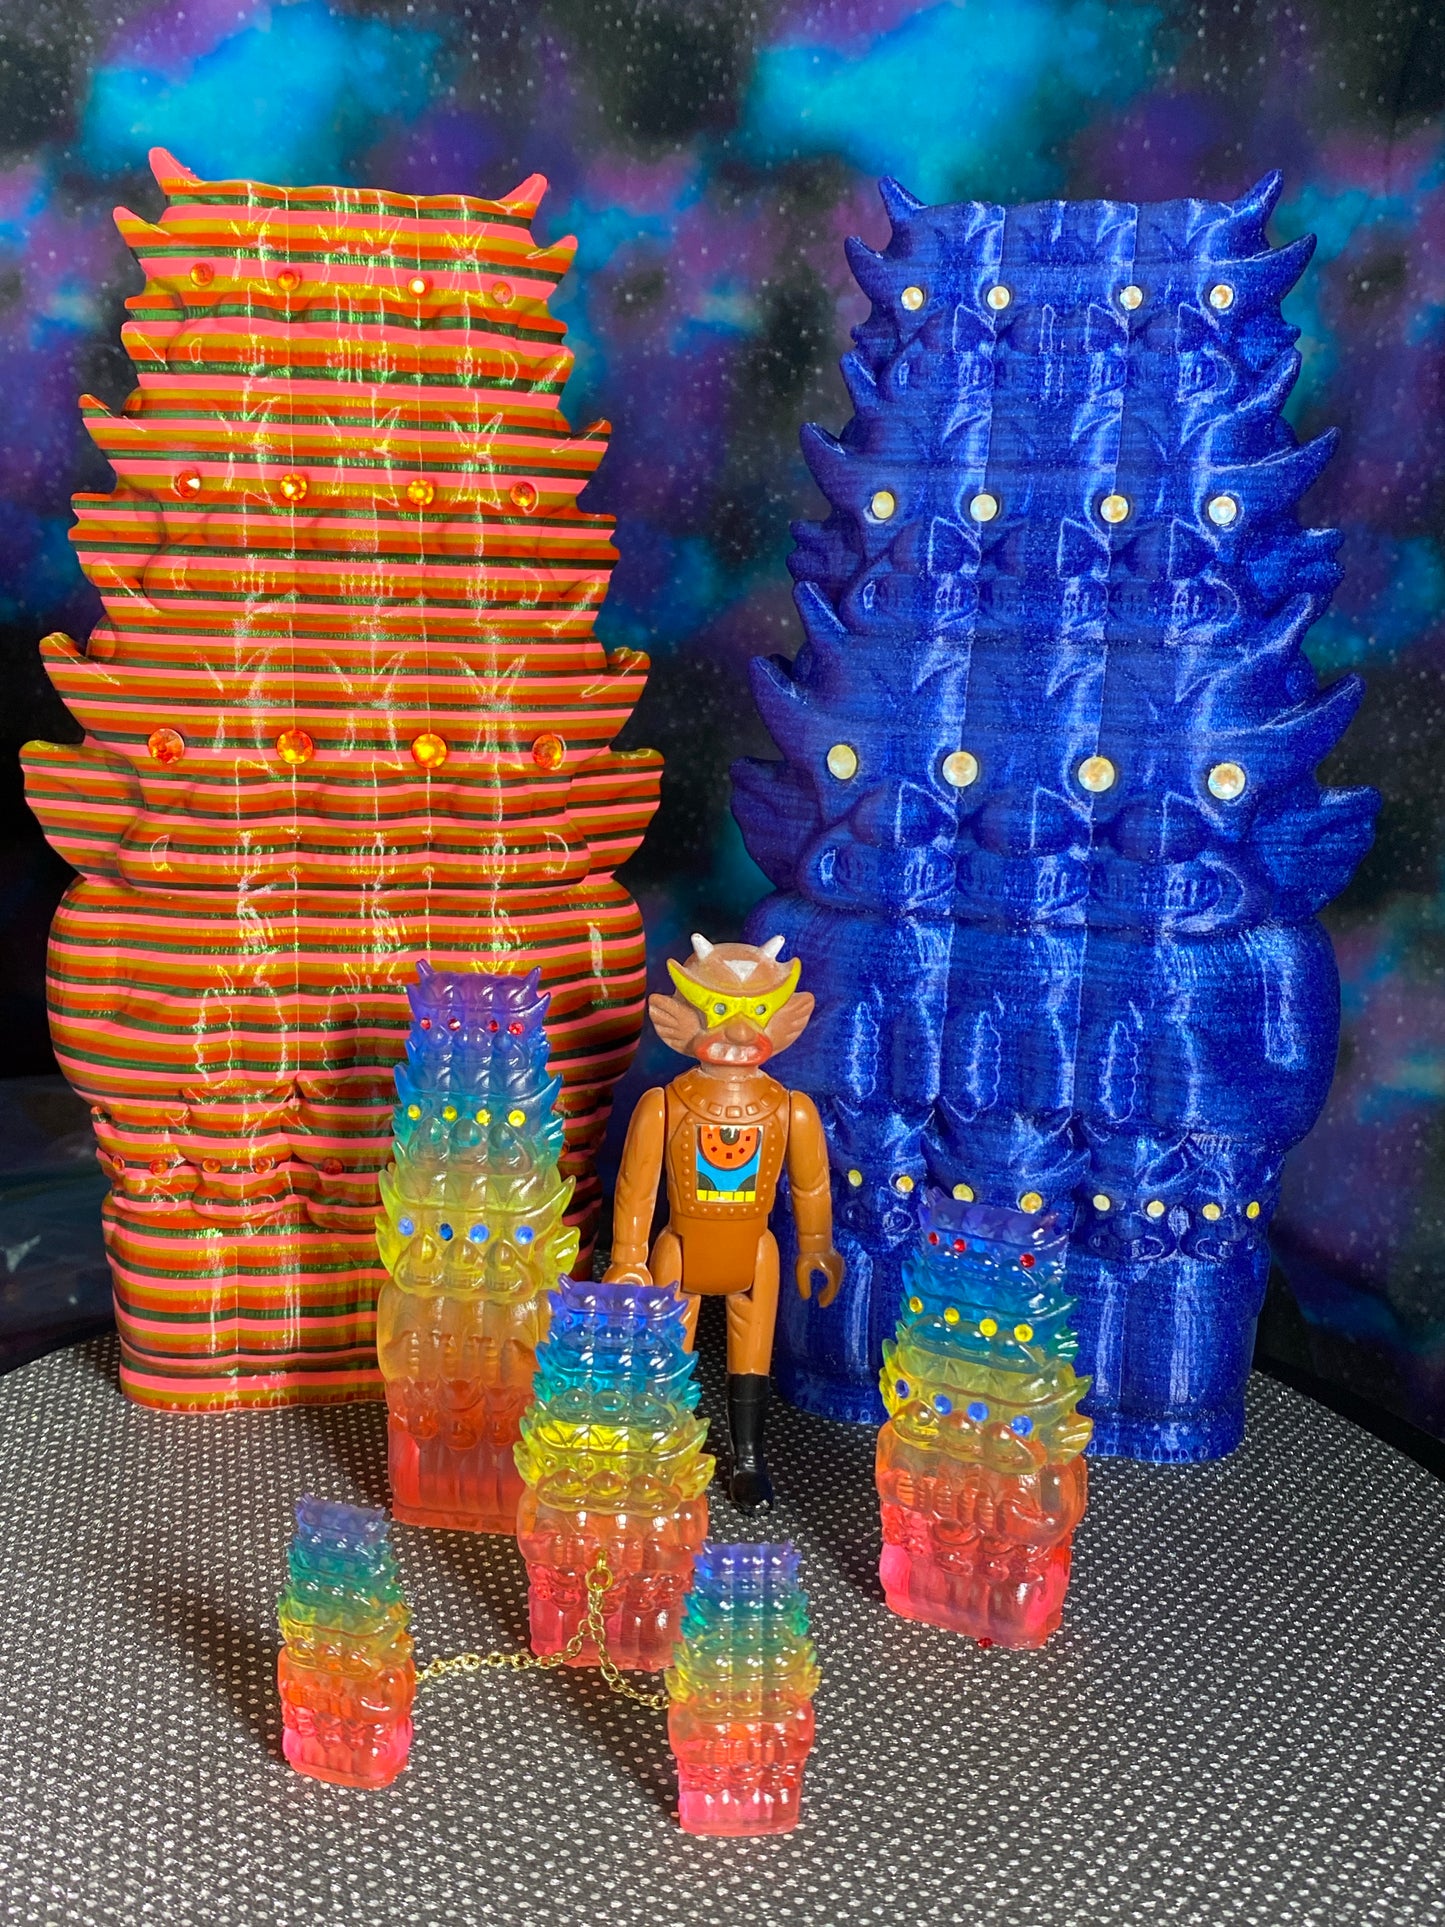 Aton Ape God of Space: Glitter Blue with Yellow Eyes